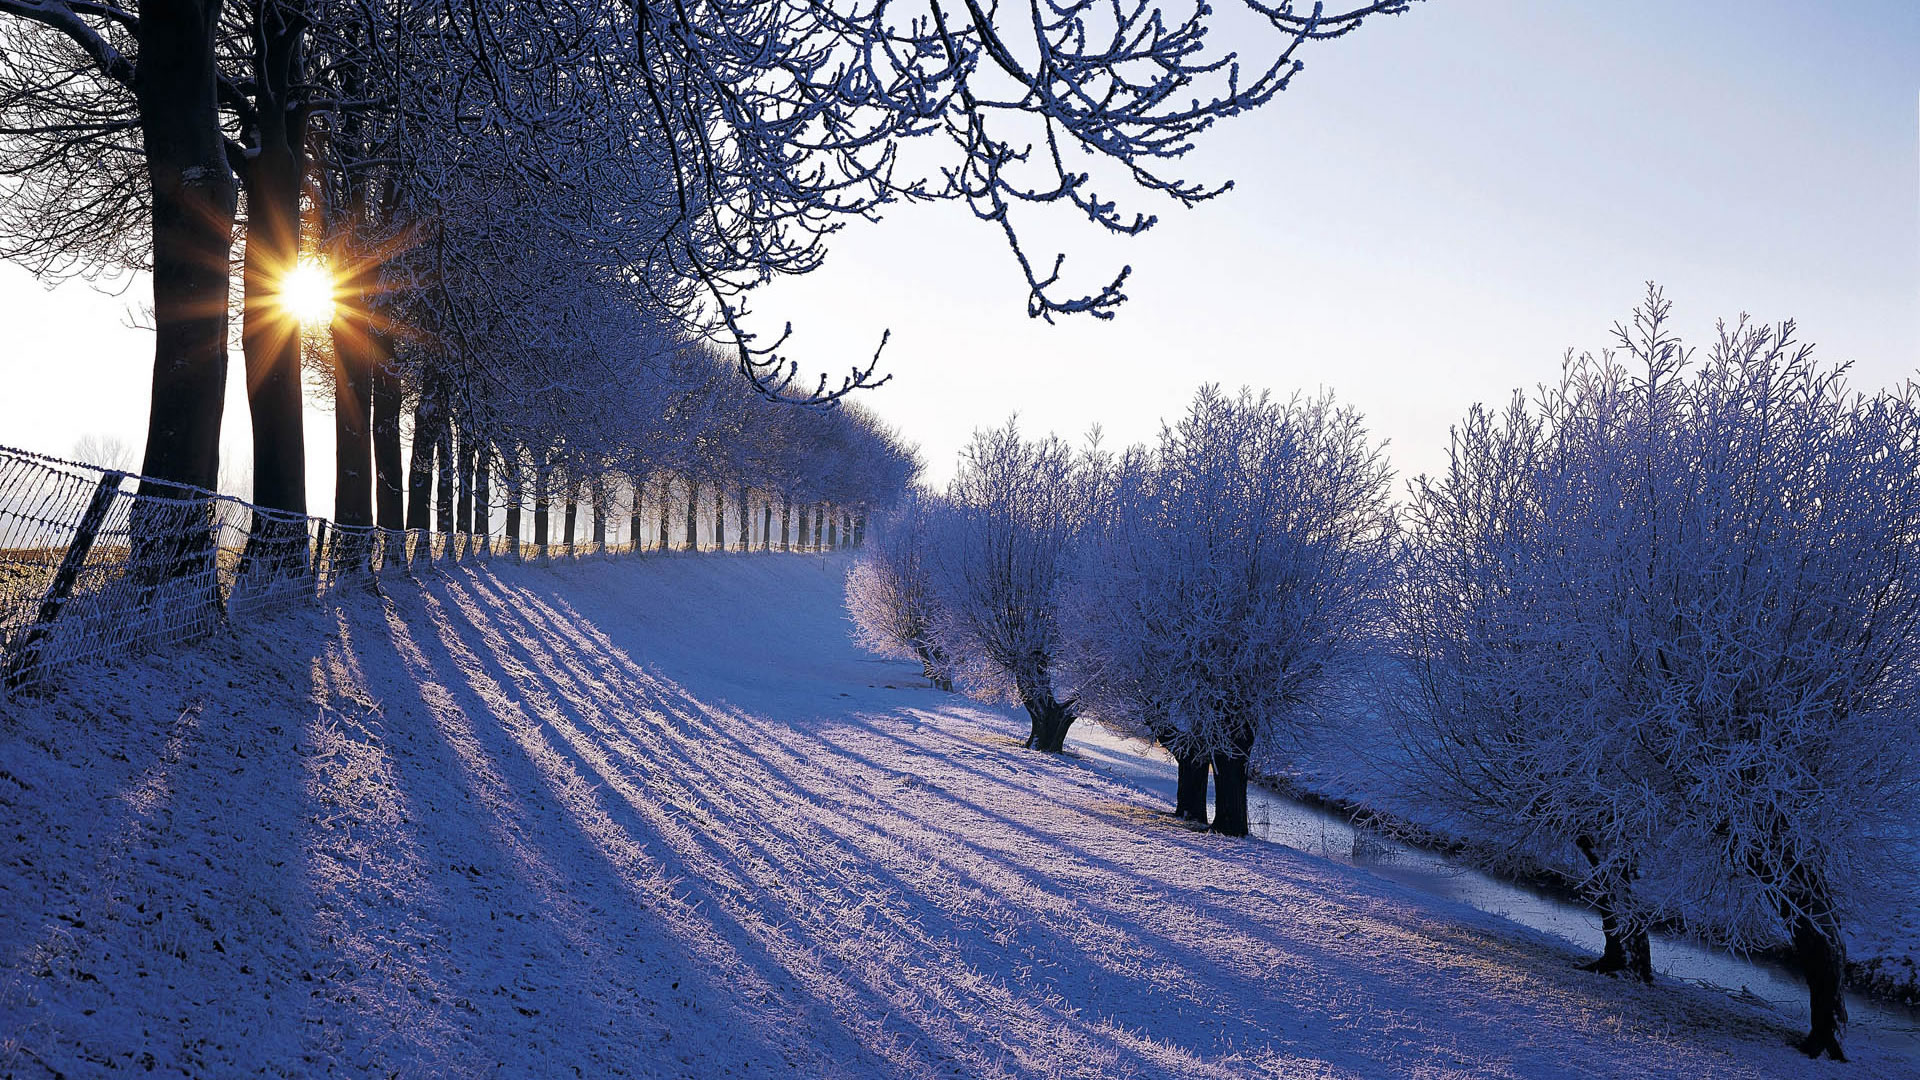 Wallpaper Winter Which Is Under The Category Of